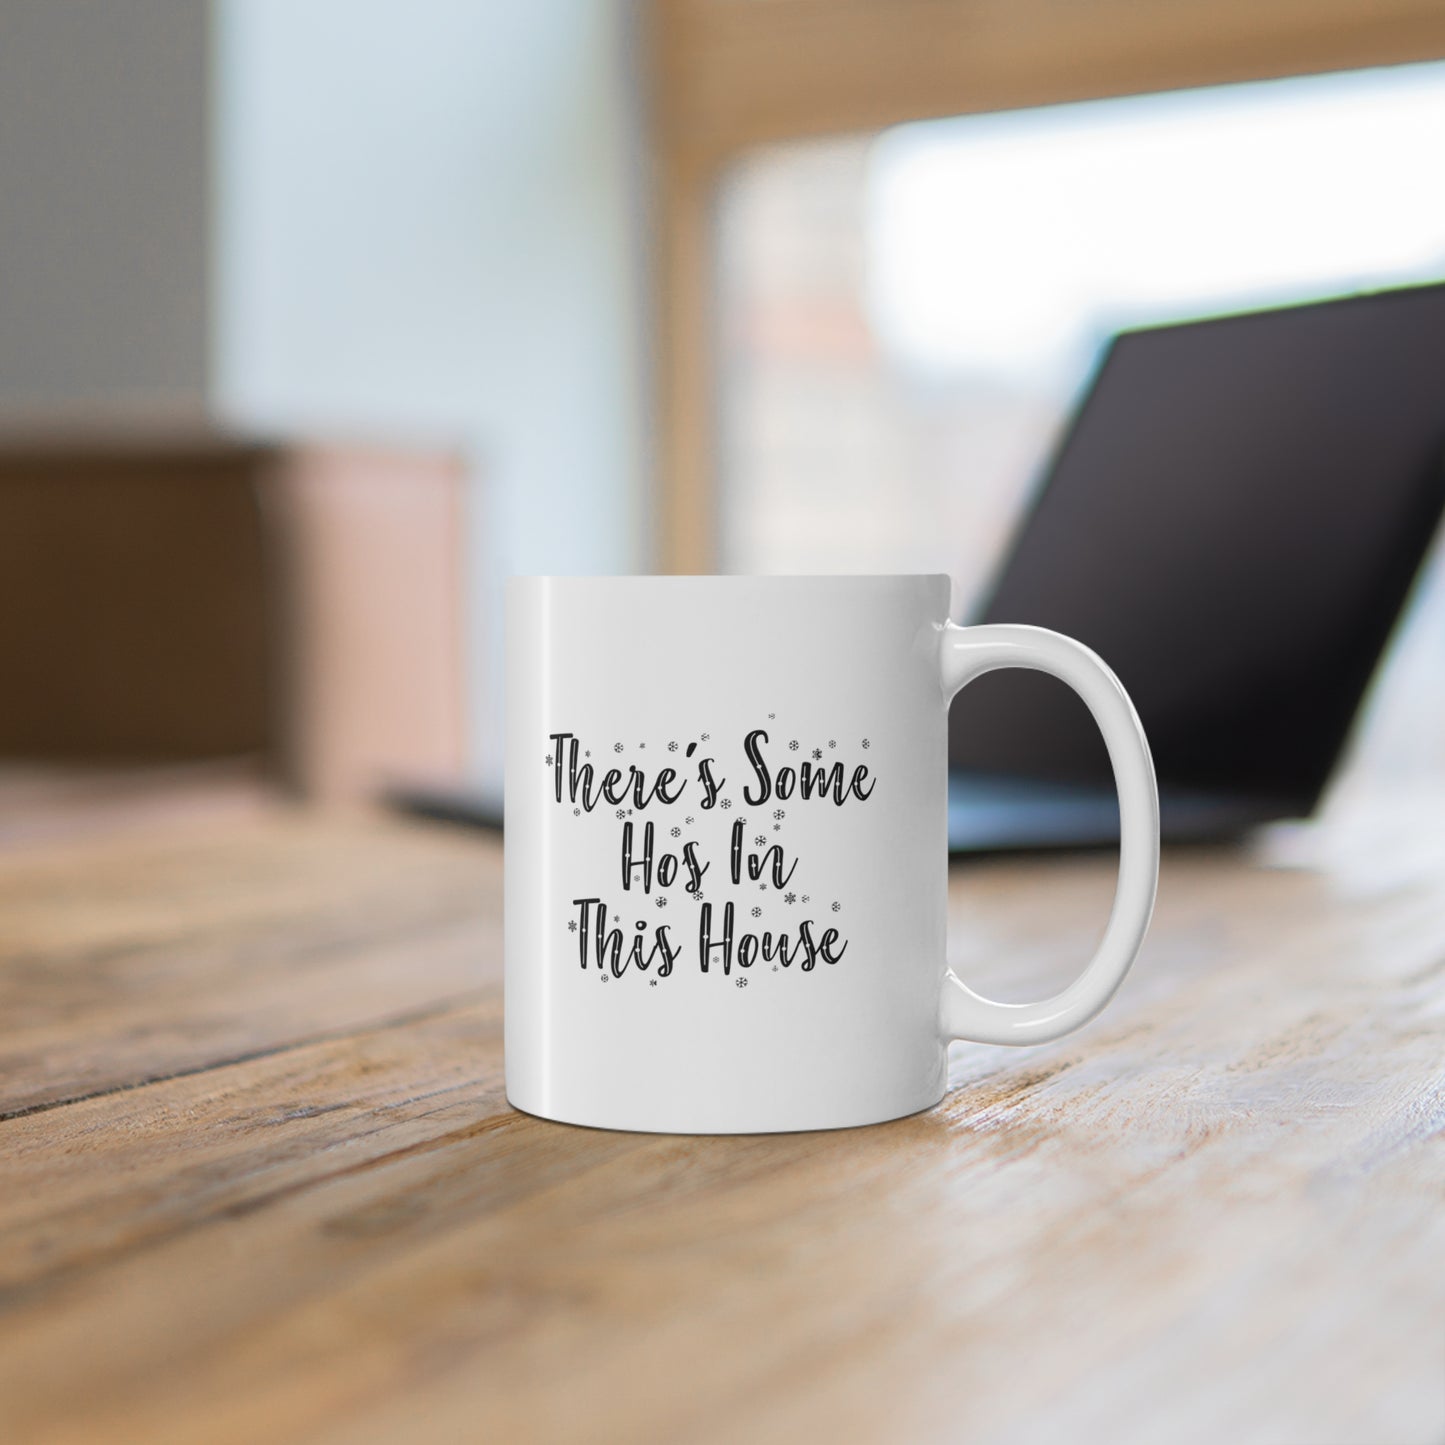 There's some hos in this house Coffee ceramic Mug 11oz